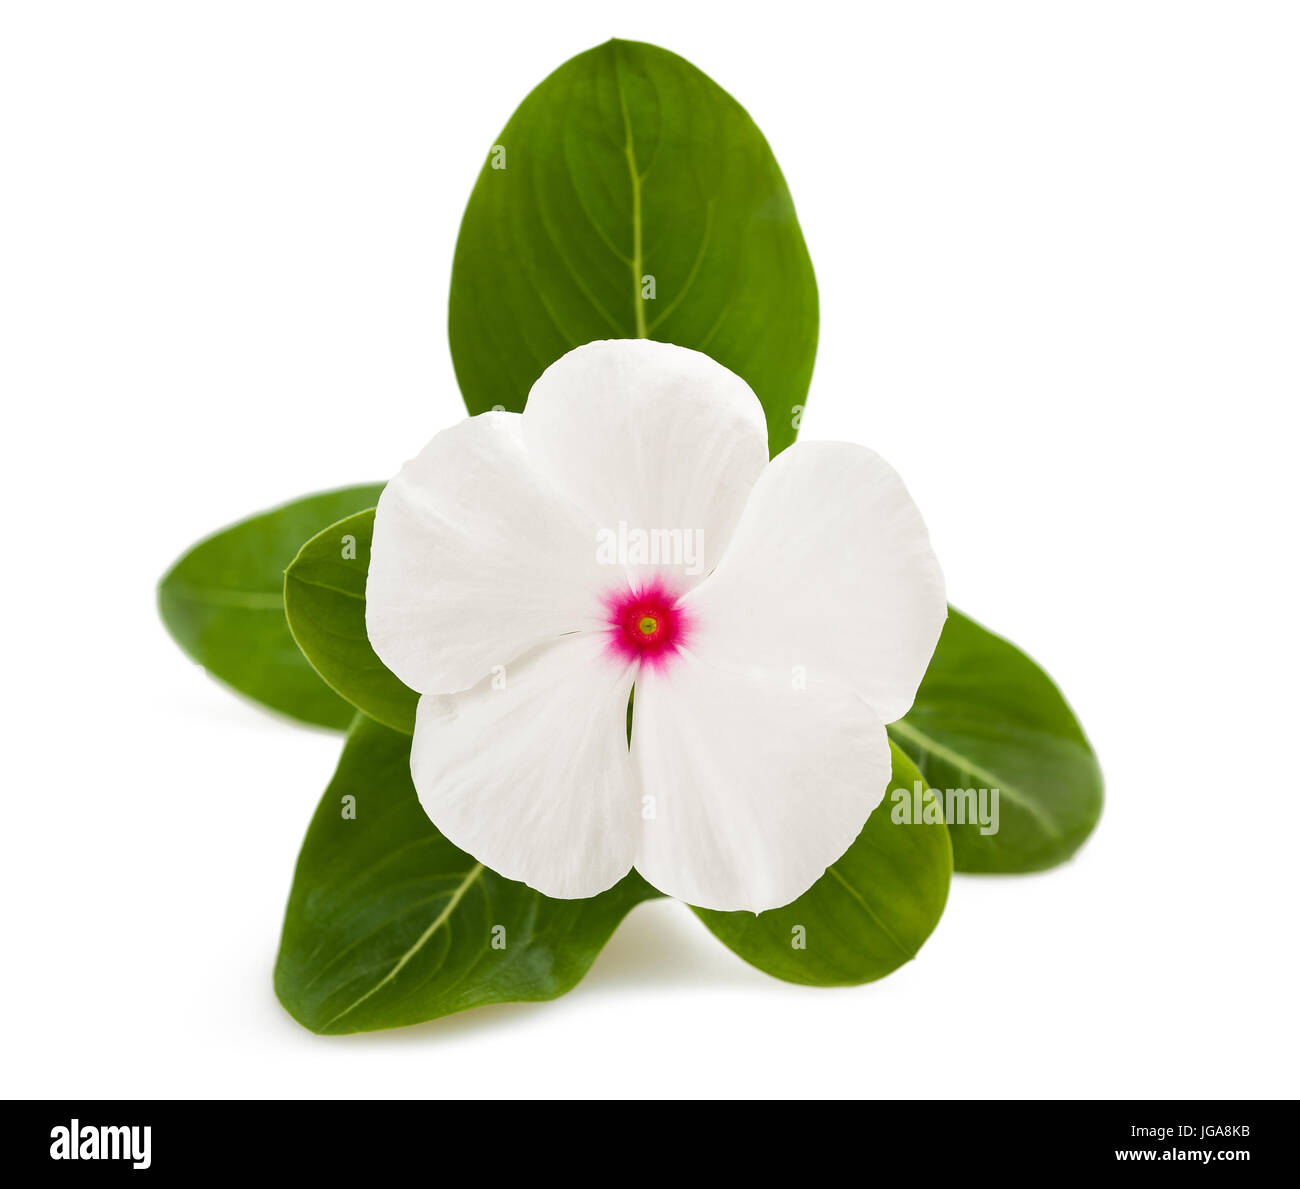 periwinkle flower isolated on white Stock Photo